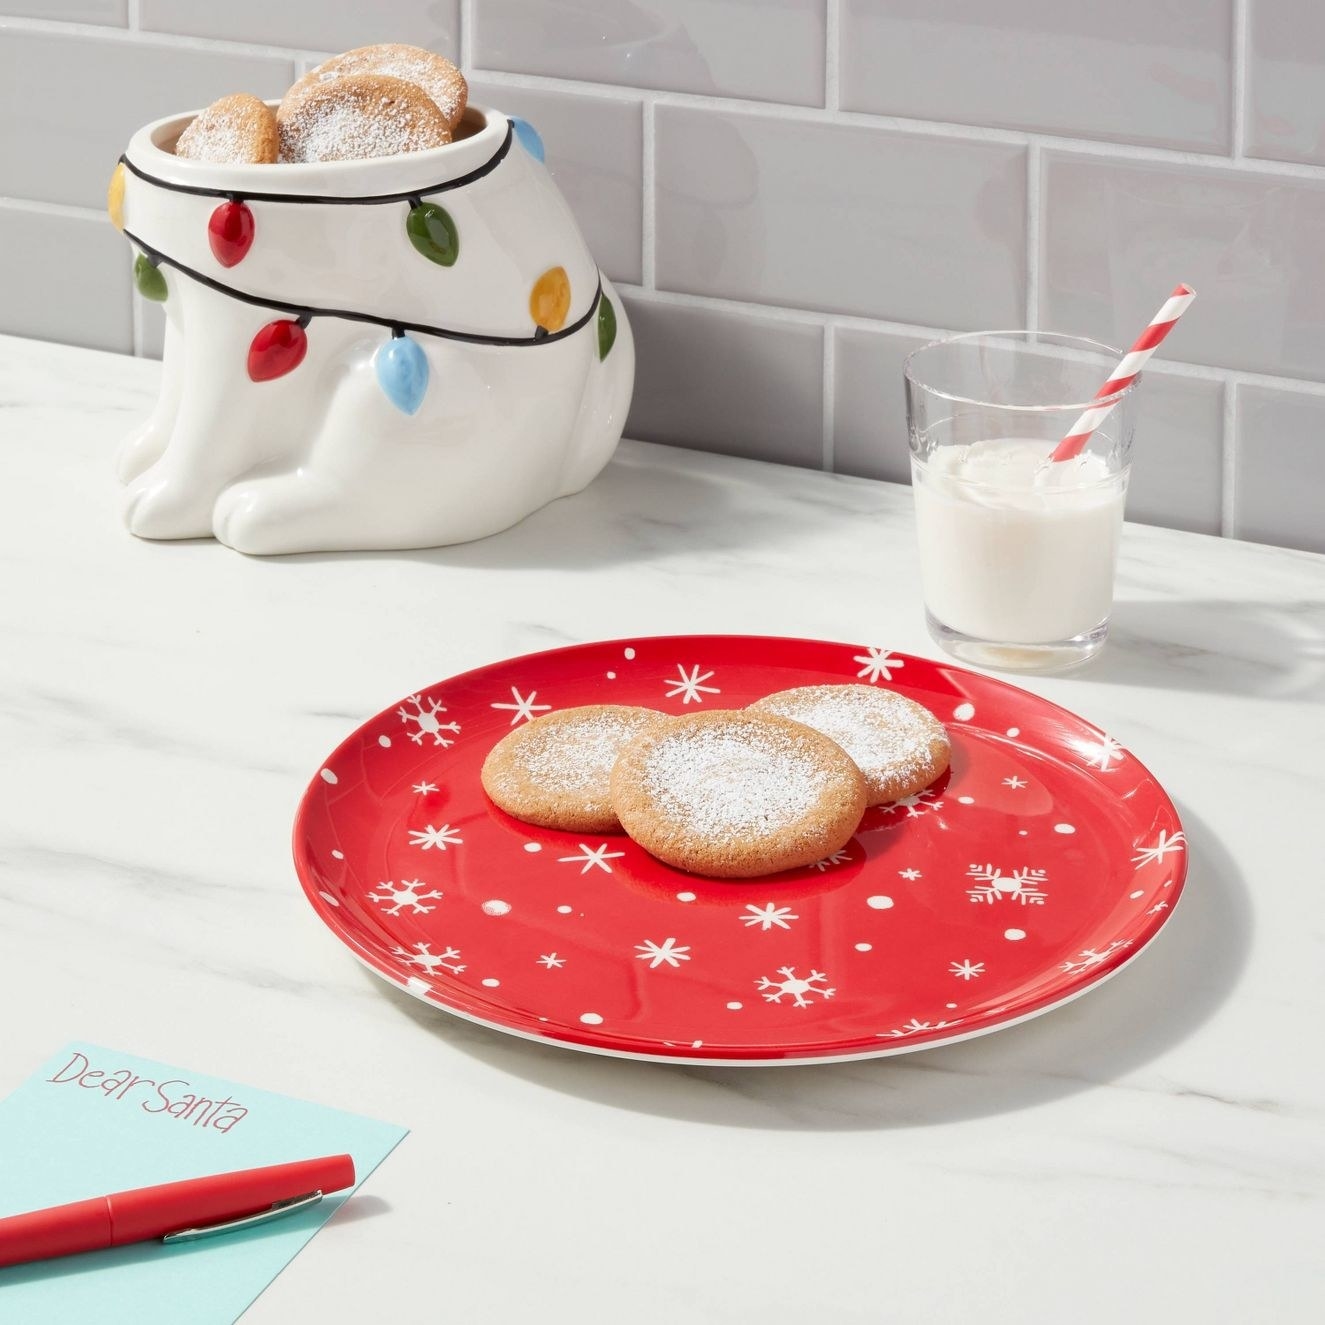 The red plate with a snowflake design styled with cookies on top